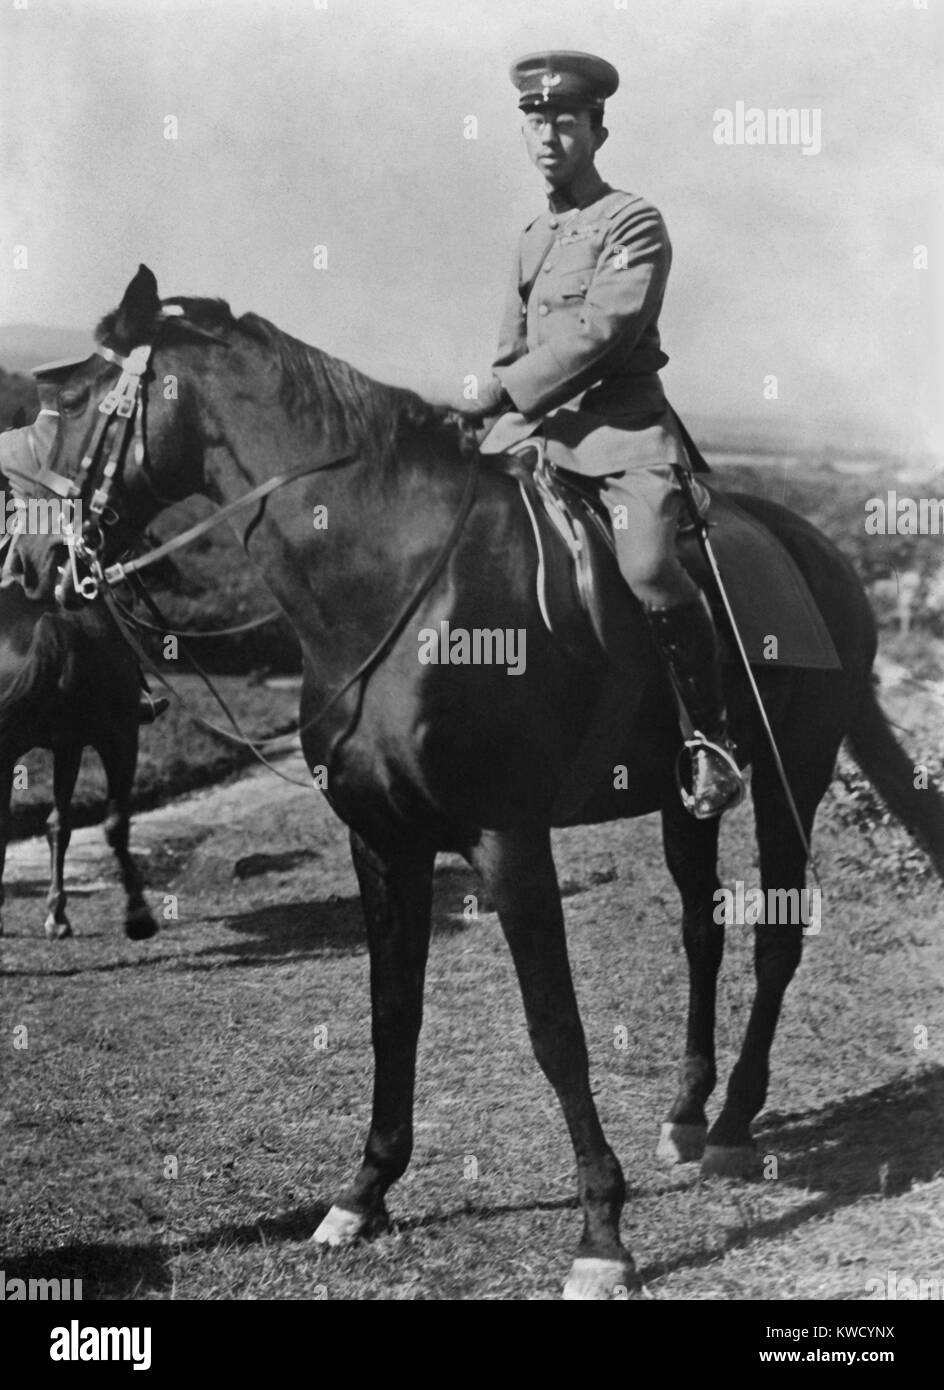 Crown Prince Hirohito, of Japan, on horseback, c. 1920. Emperor Showa was the 124th Emperor of Japan reigning from 1926-1989 (BSLOC 2017 2 74) Stock Photo